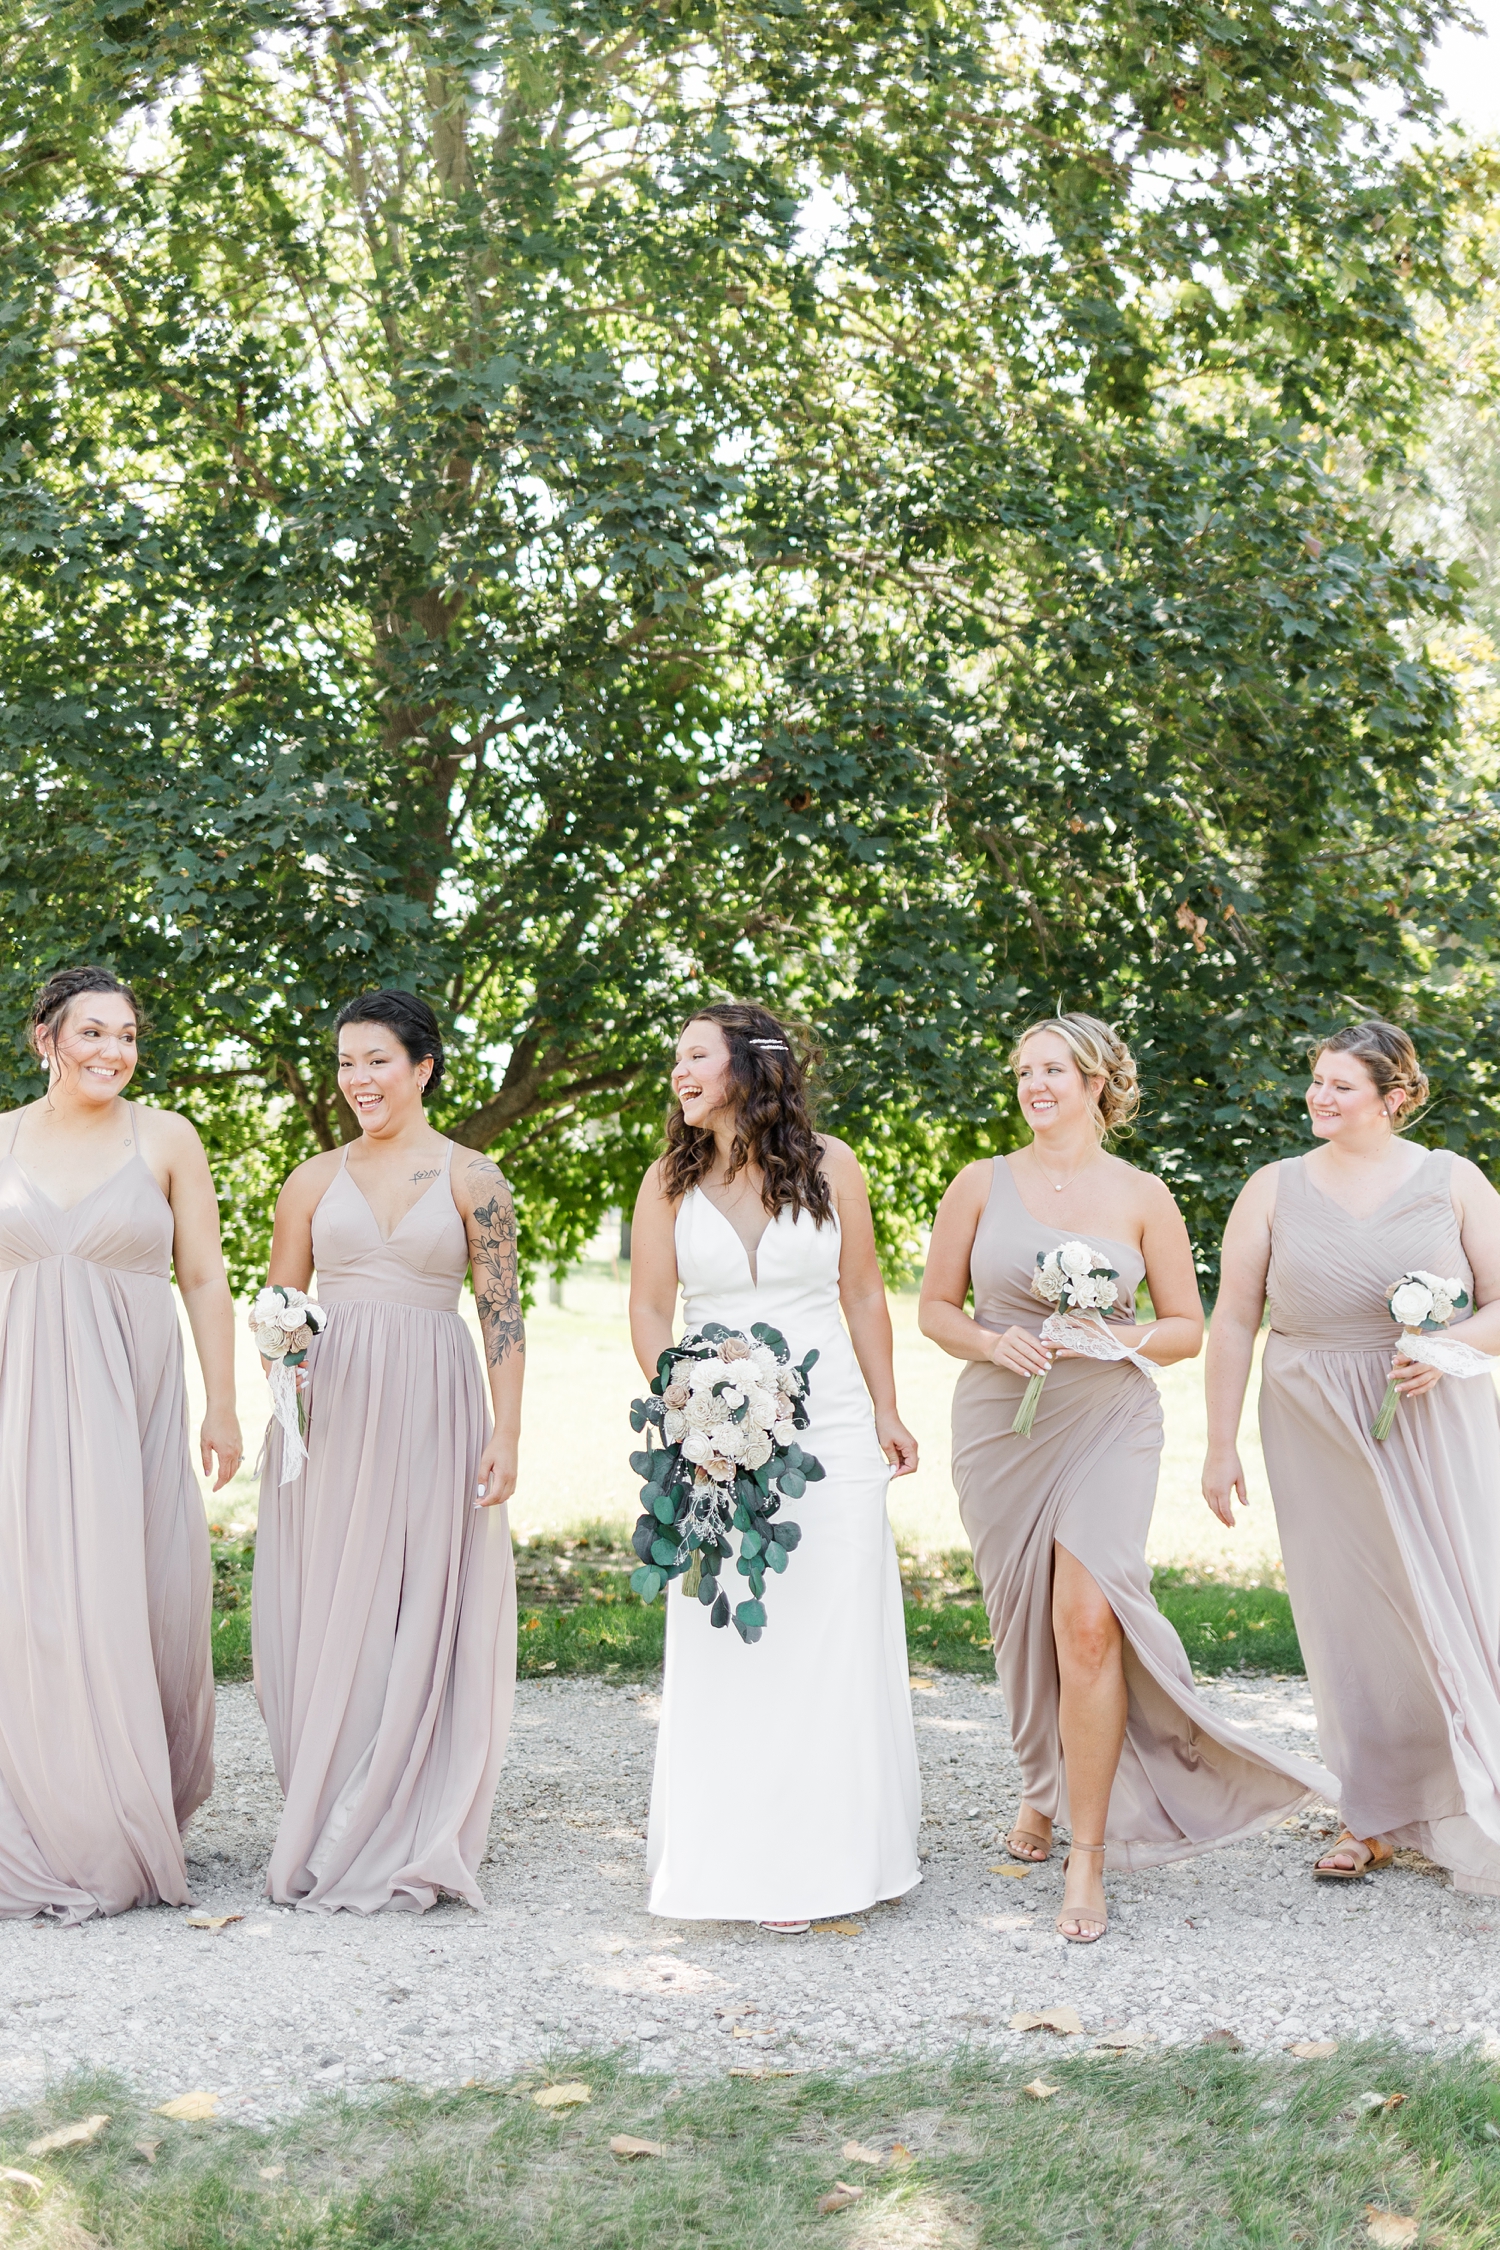 Alyssa and her bridesmaids walk together laughing at 5 Island Campground in Emmetsburg, IA | CB Studio